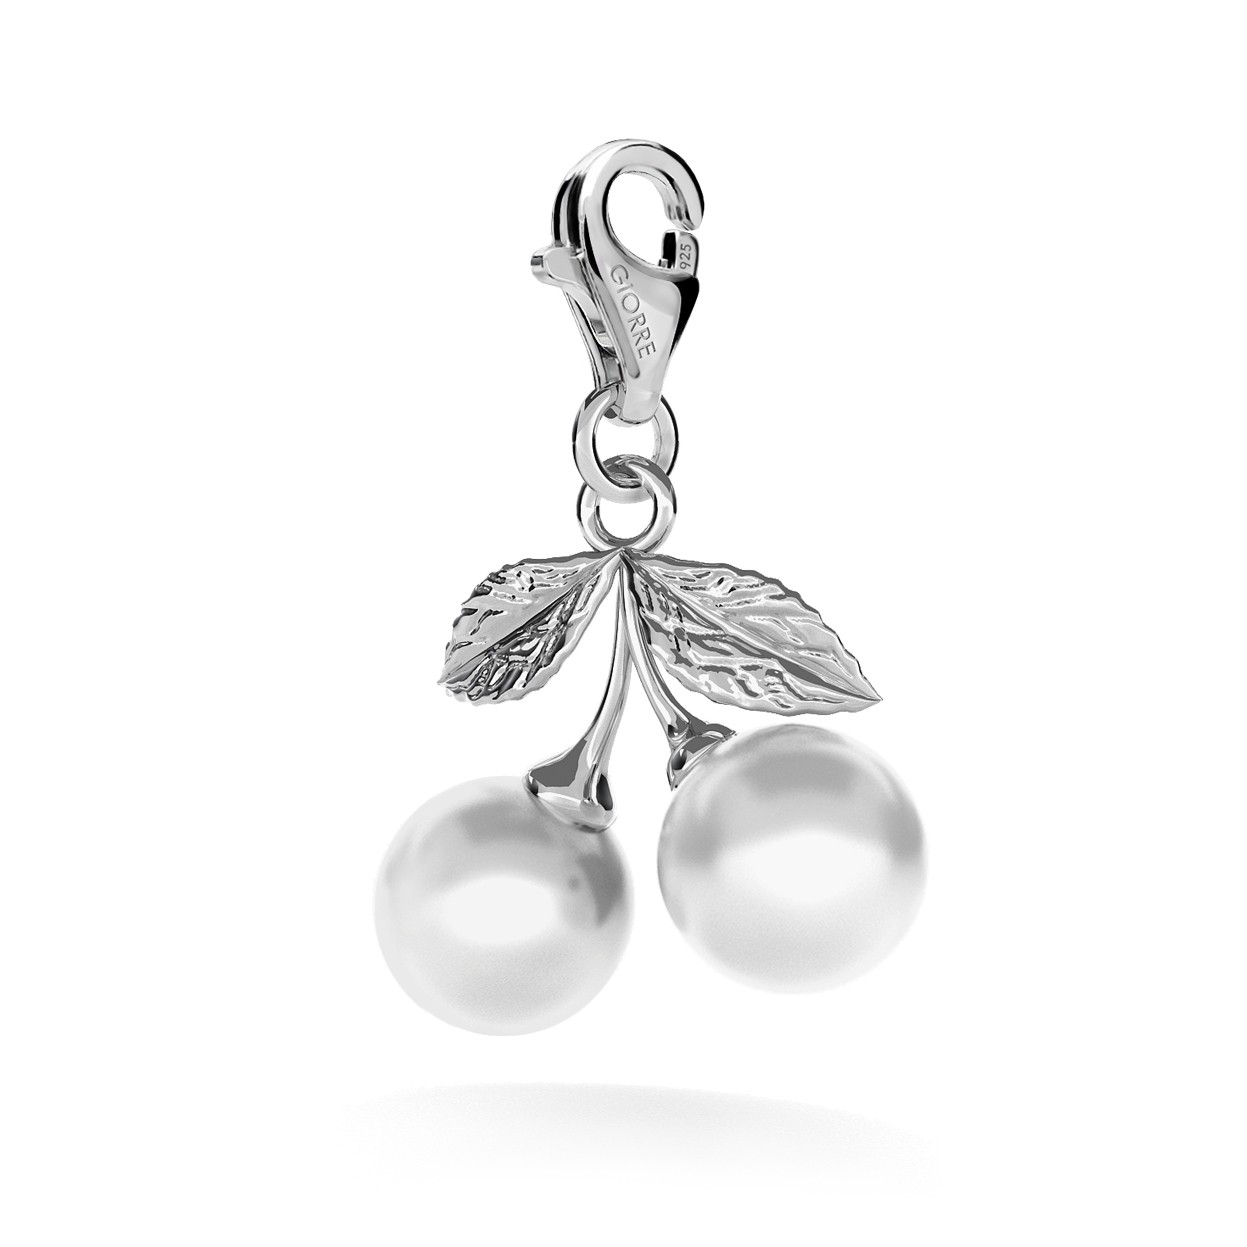 CHARM 33, CHERRY, SILVER 925, RHODIUM OR GOLD PLATED